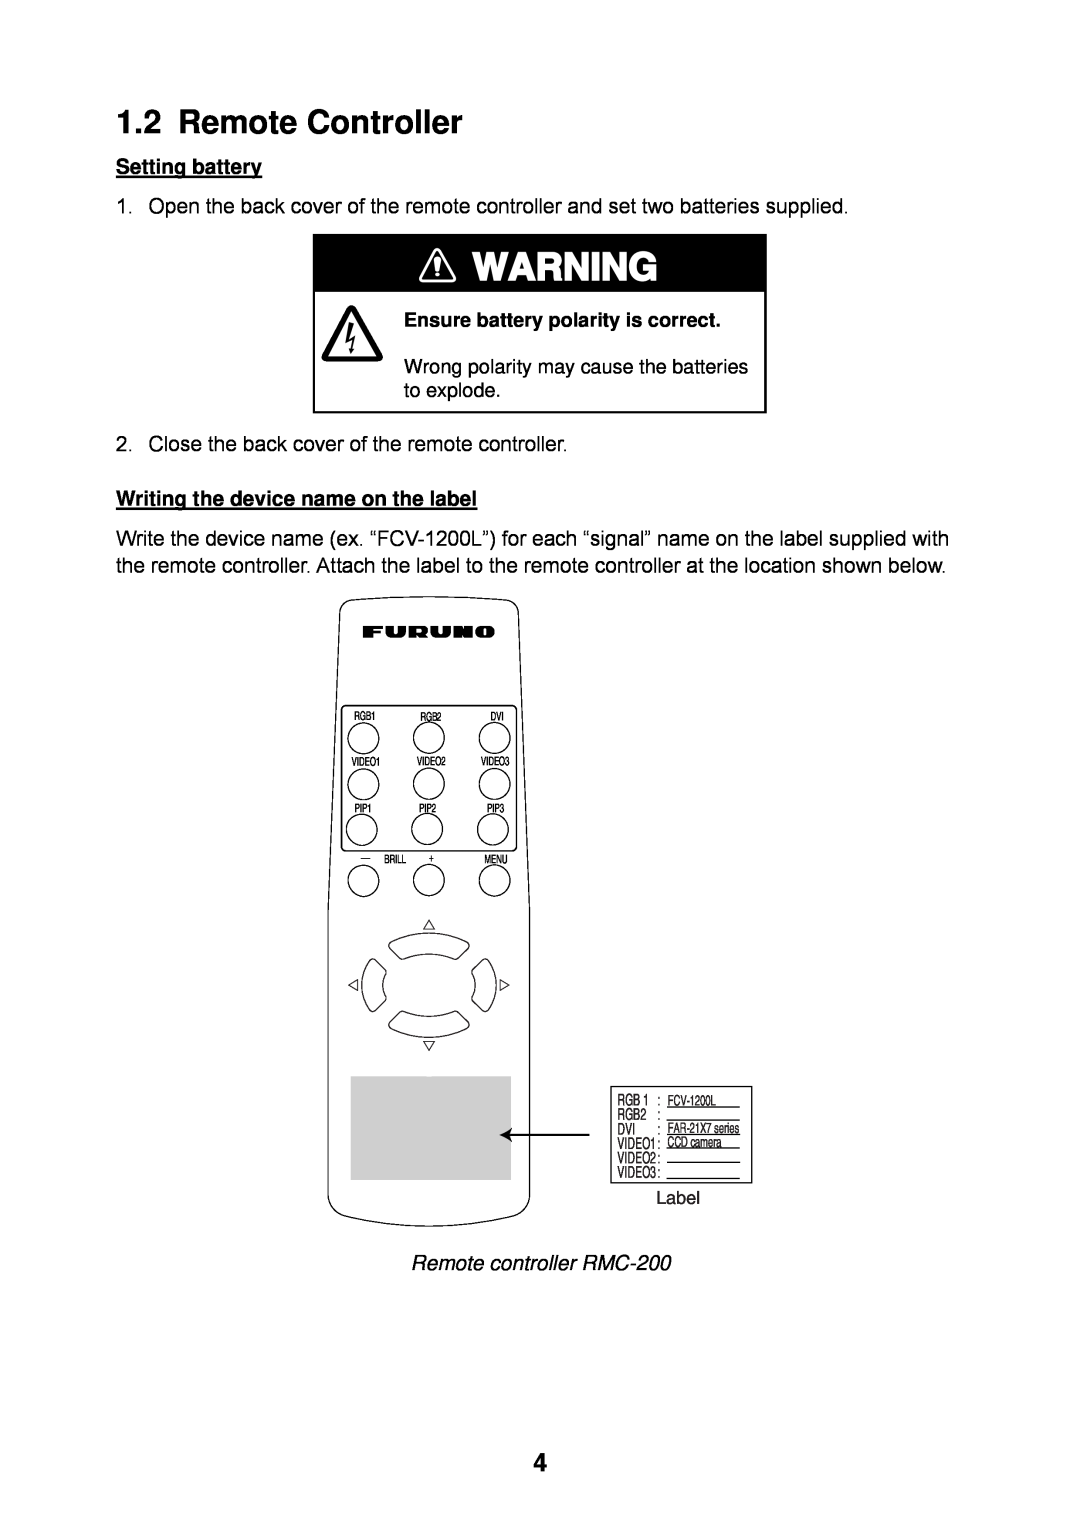 Furuno MU-170C manual Remote Controller, Setting battery, Writing the device name on the label 